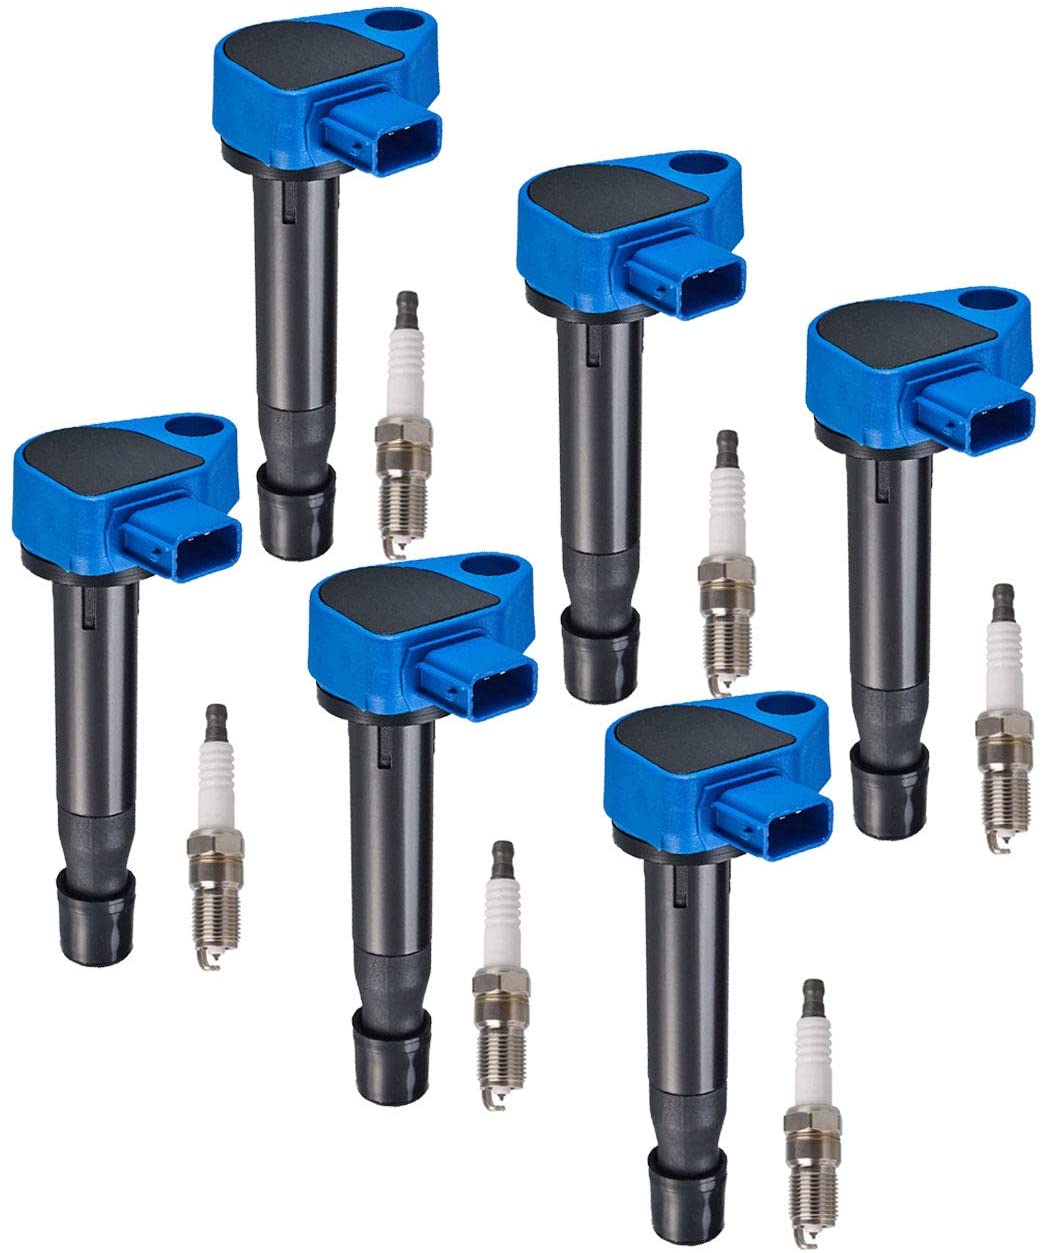 ENA High Performance Ignition Coil and Spark Plug Set of 6 Compatible with 2001-2005 Honda Civic 1.7L L4 2001-2005 Acura EL 1.7L L4 UF242